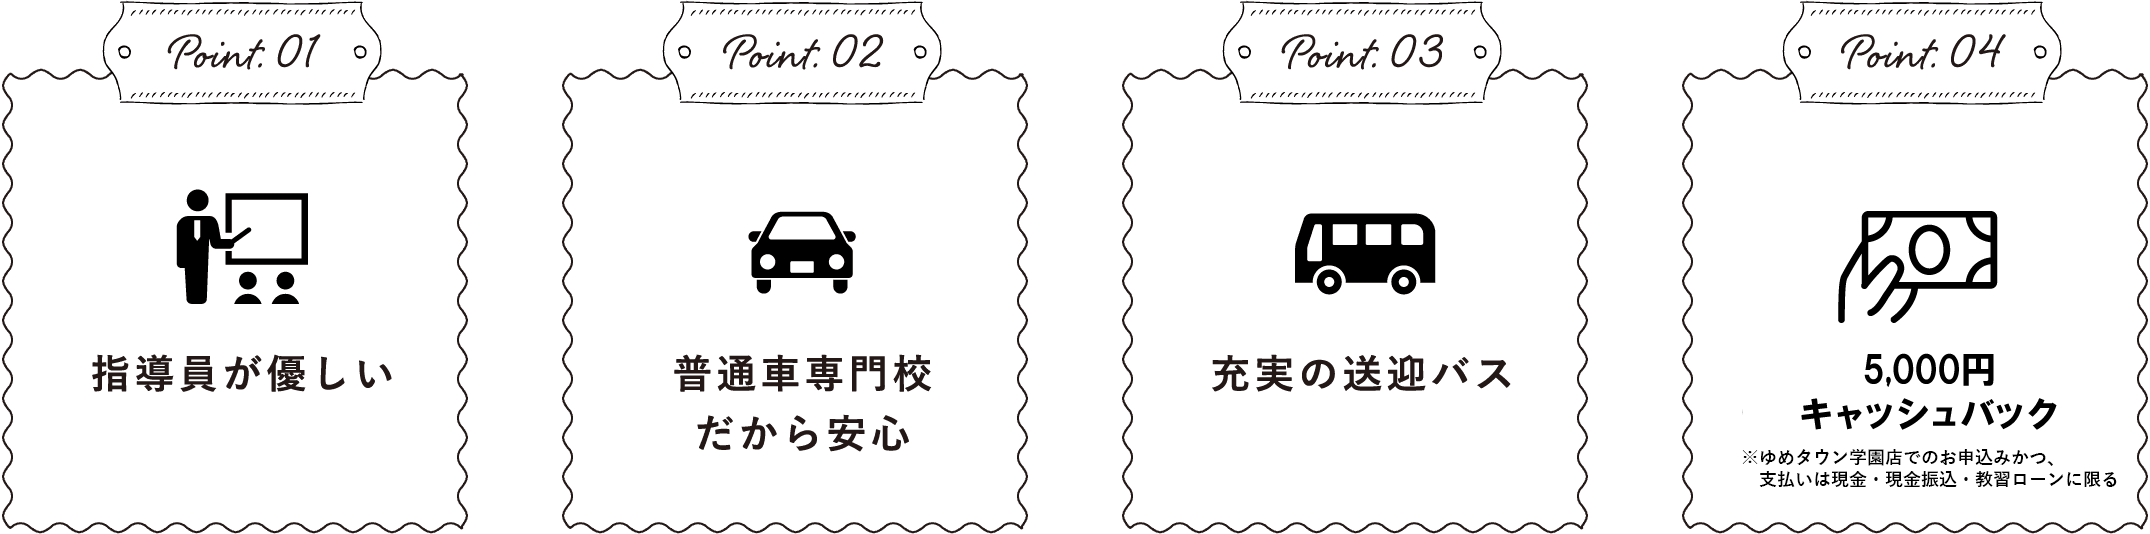 Point.01指導員が優しいPoint.02普通⾞専⾨校だから安⼼Point.03充実の送迎バスPoint.04QUOカード5000円分プレゼント※